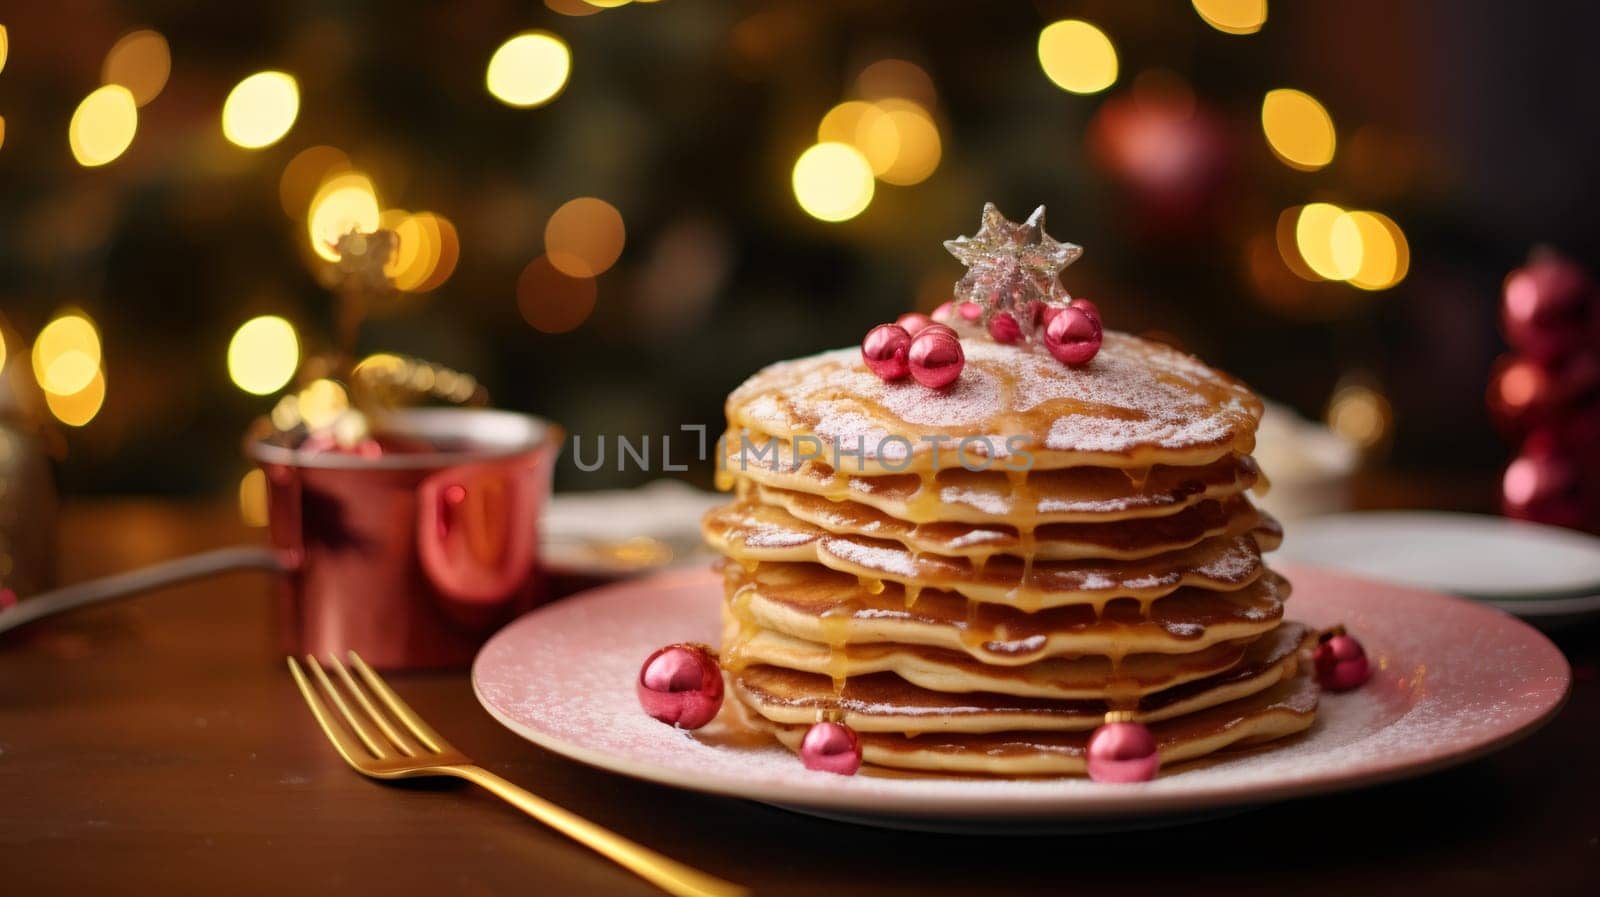 Fresh pancakes with caramel sauce and Christmas decorations on the table. by Nataliya